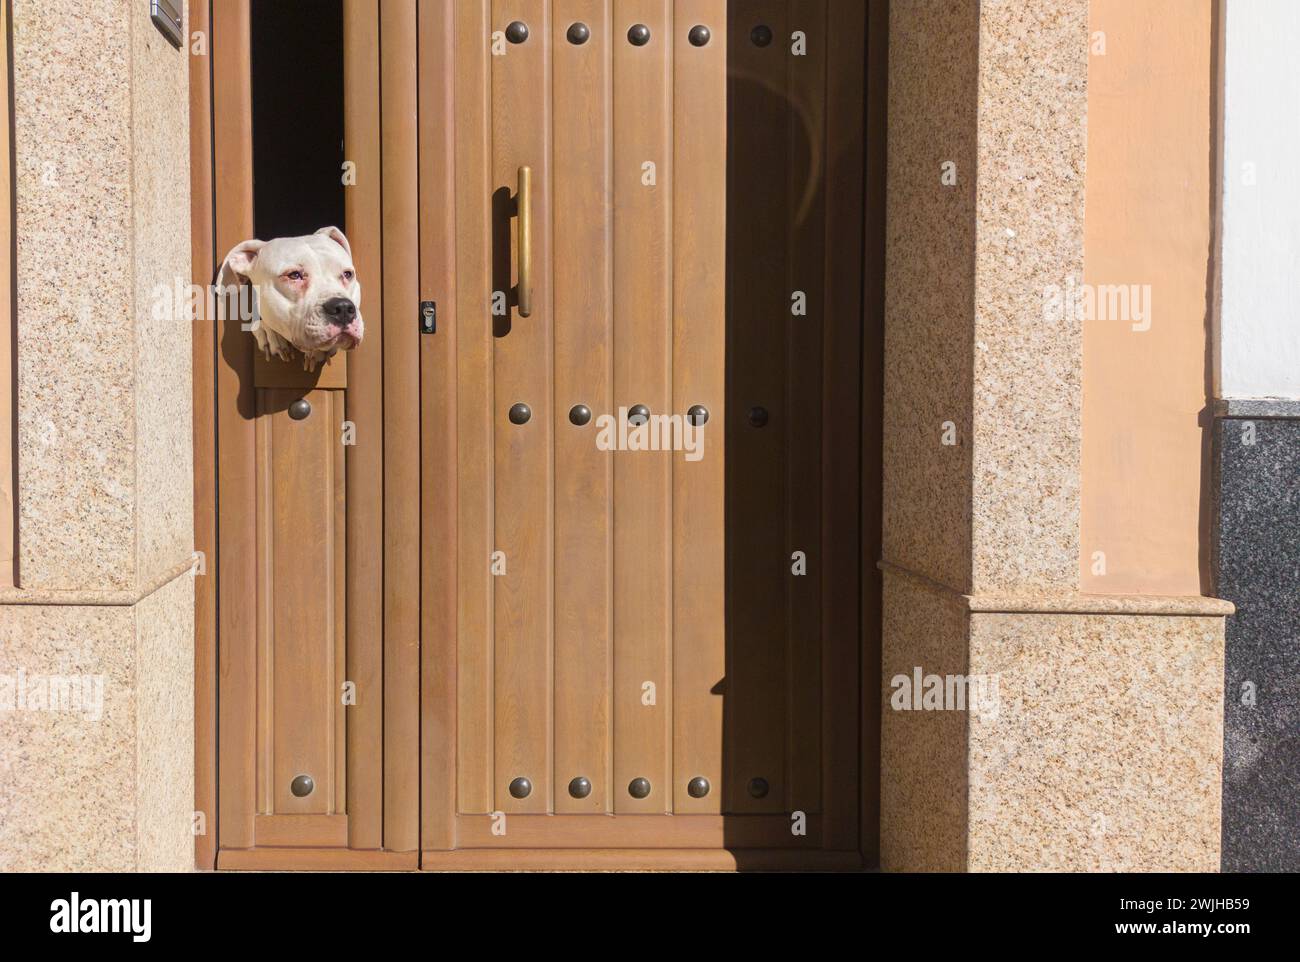 Dogo argentino dog peeking out of a street door window. Curious expression Stock Photo